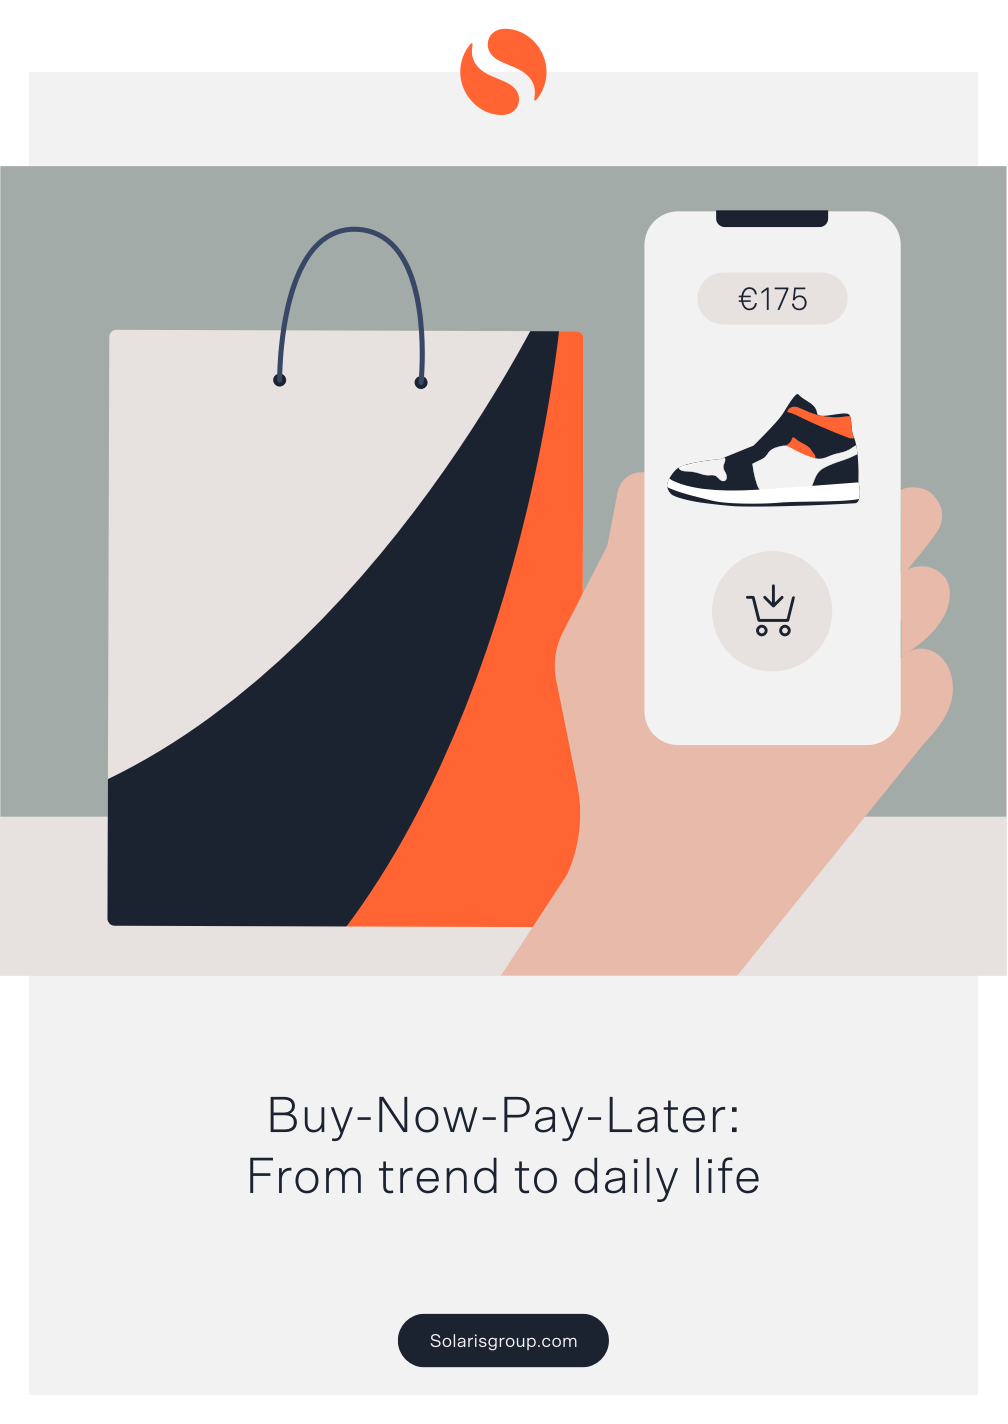 Buy-Now-Pay-Later: From trend to daily life